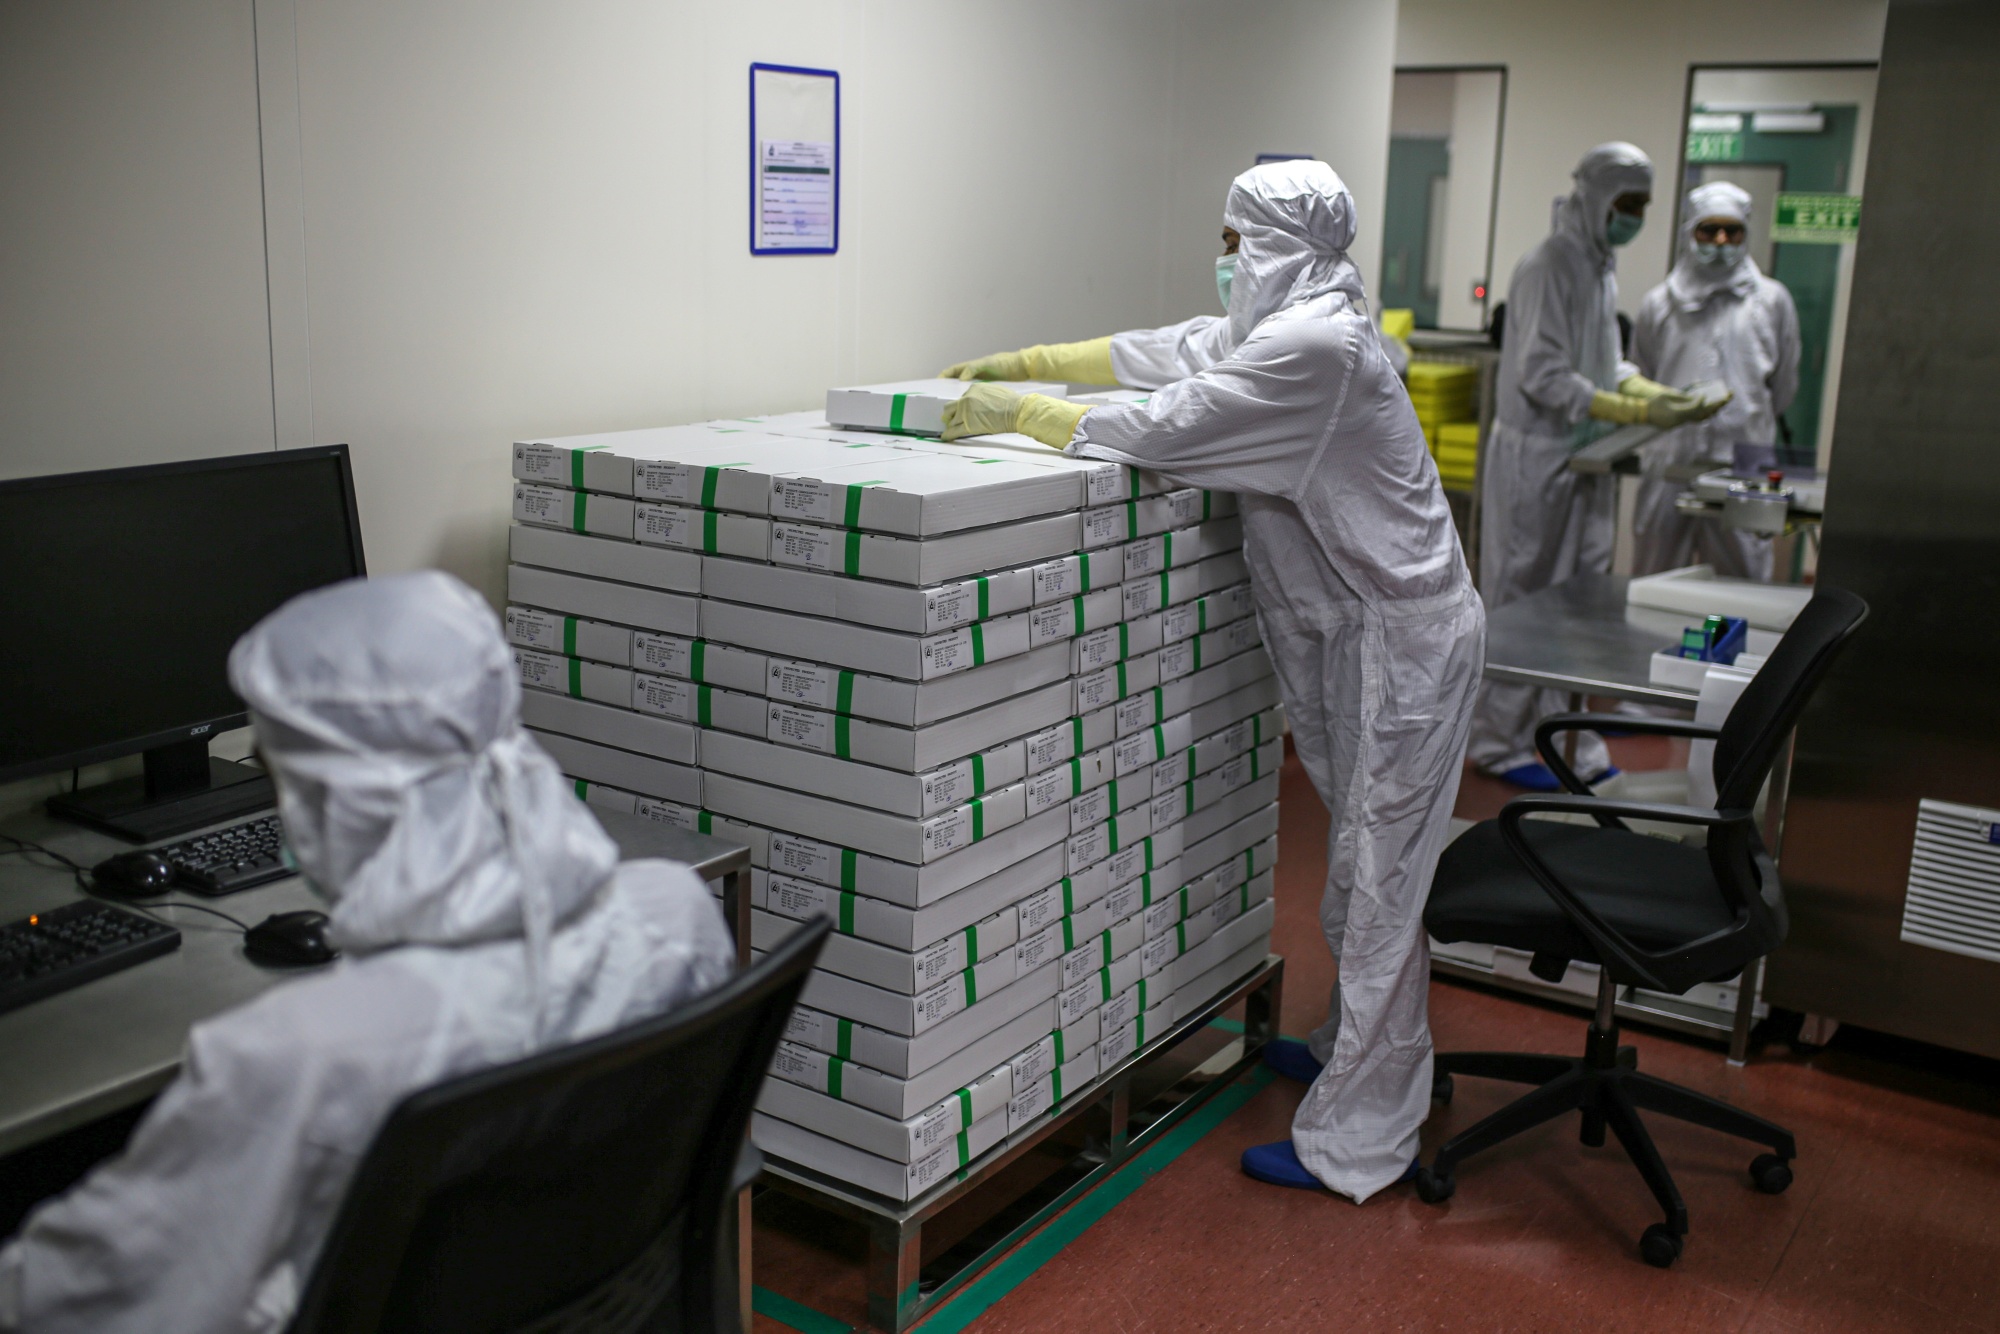 A employee stacks packed vials of Covishield, the local name for the vaccine developed by AstraZeneca, at the Serum plant in Maharashtra, on Jan. 22.